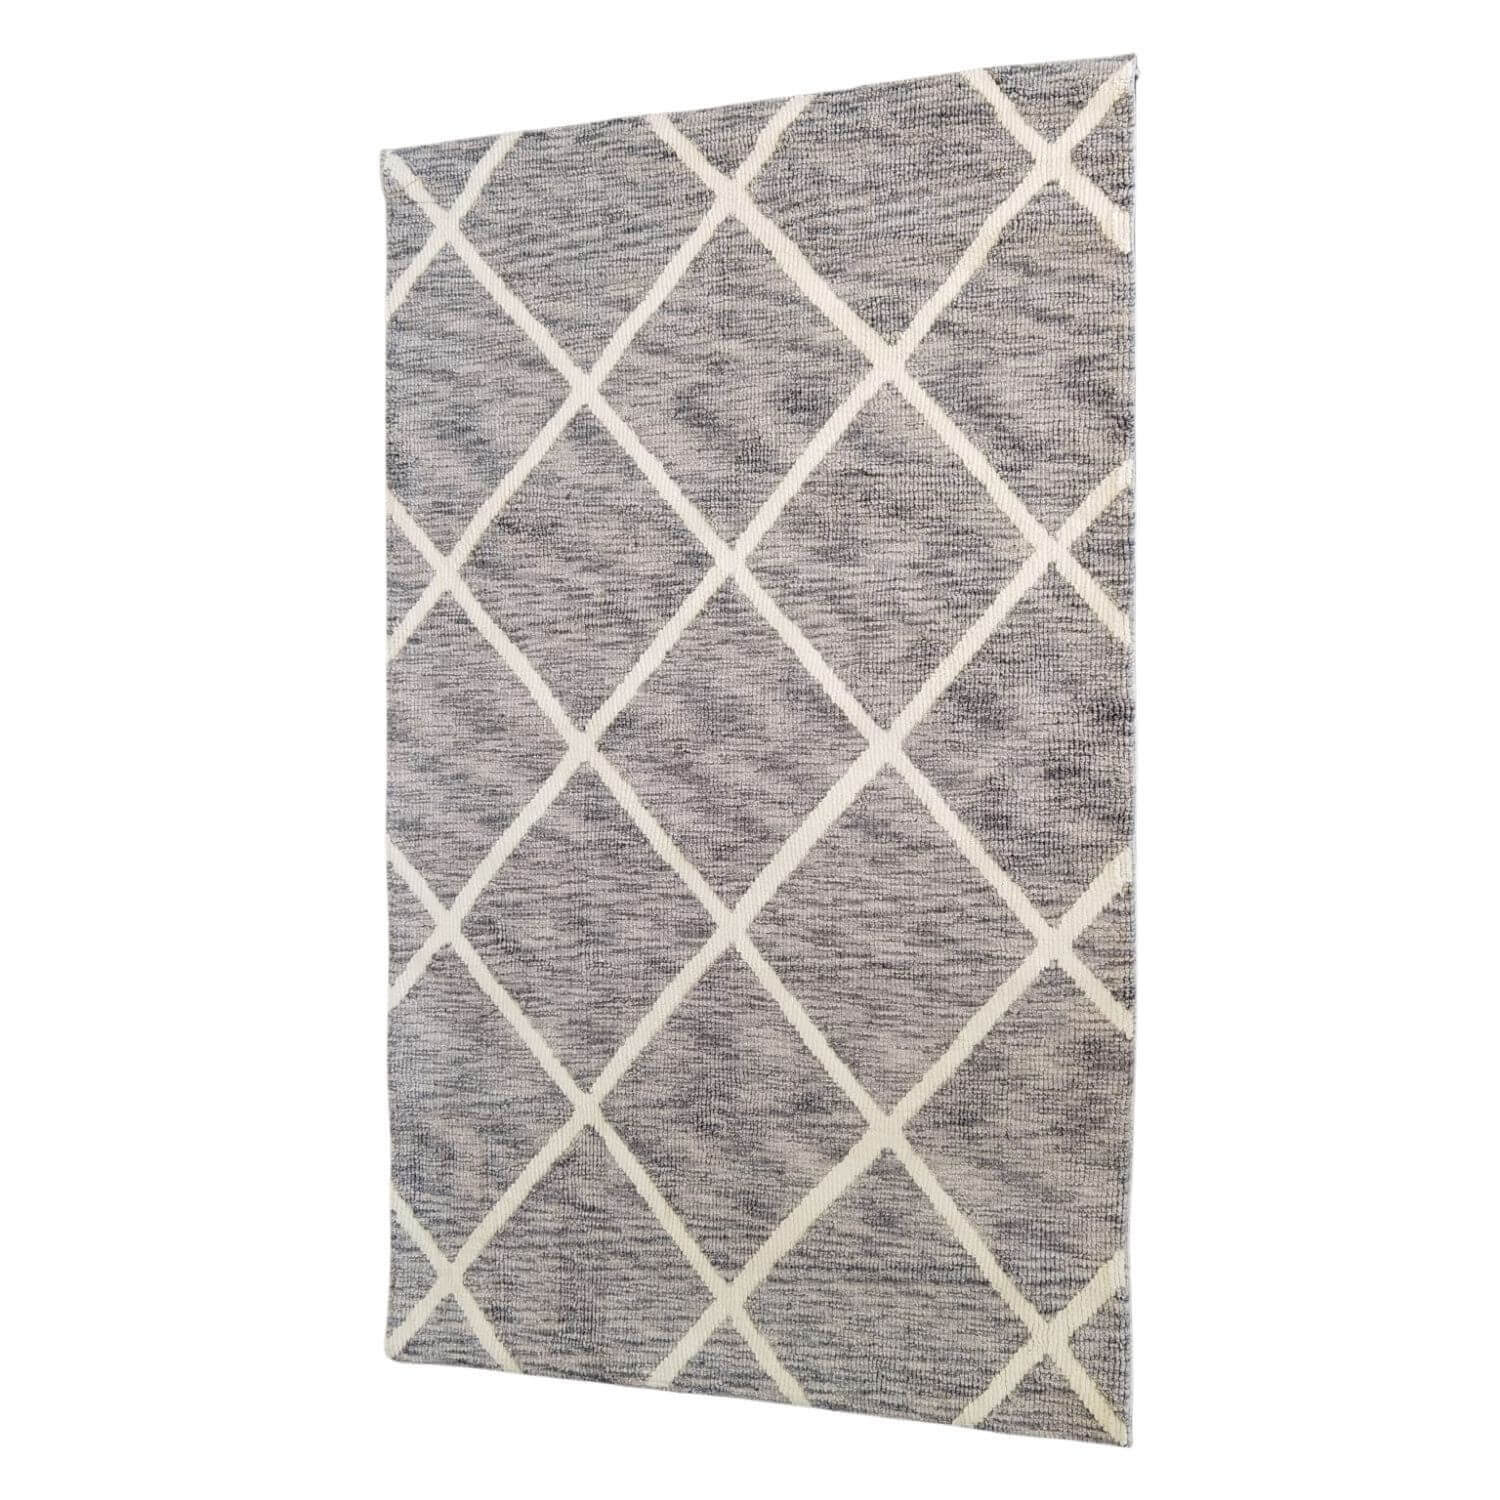 The Home Living Room Sloopy Rug 80x140cm - Grey / White 3 Shaws Department Stores